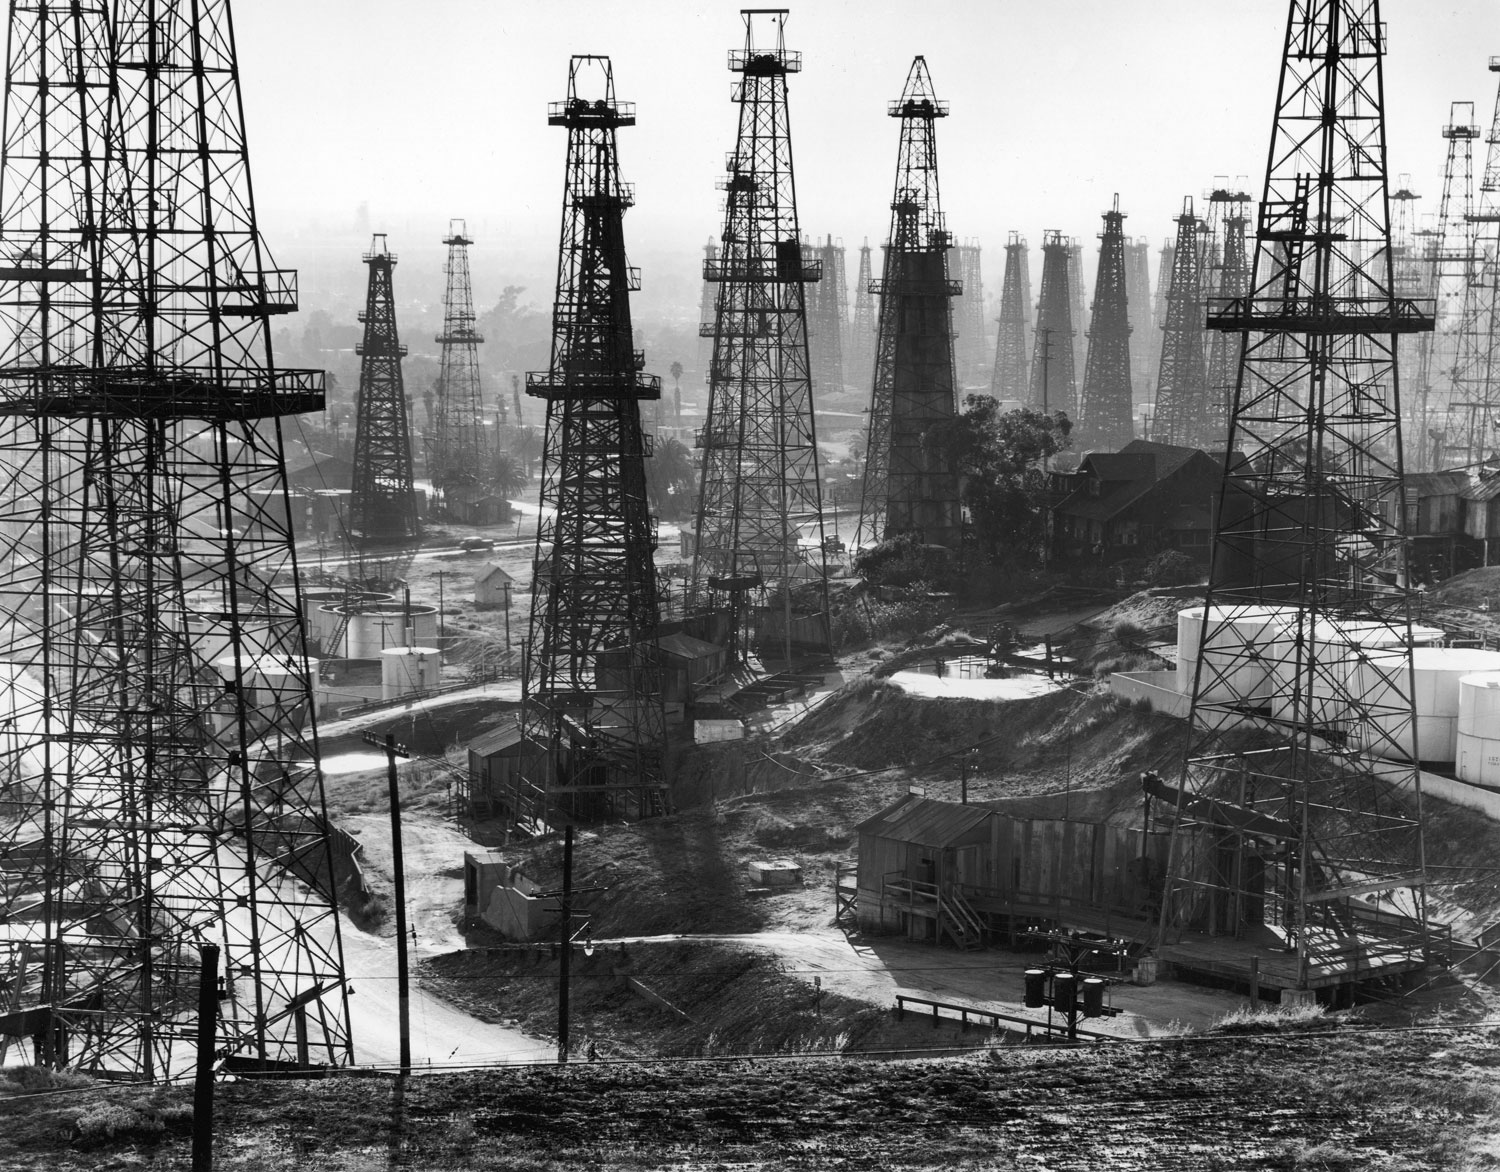 A forest of wells, rigs and derricks crowd the Signal Hill oil fields in Long Beach, Calif., 1944.